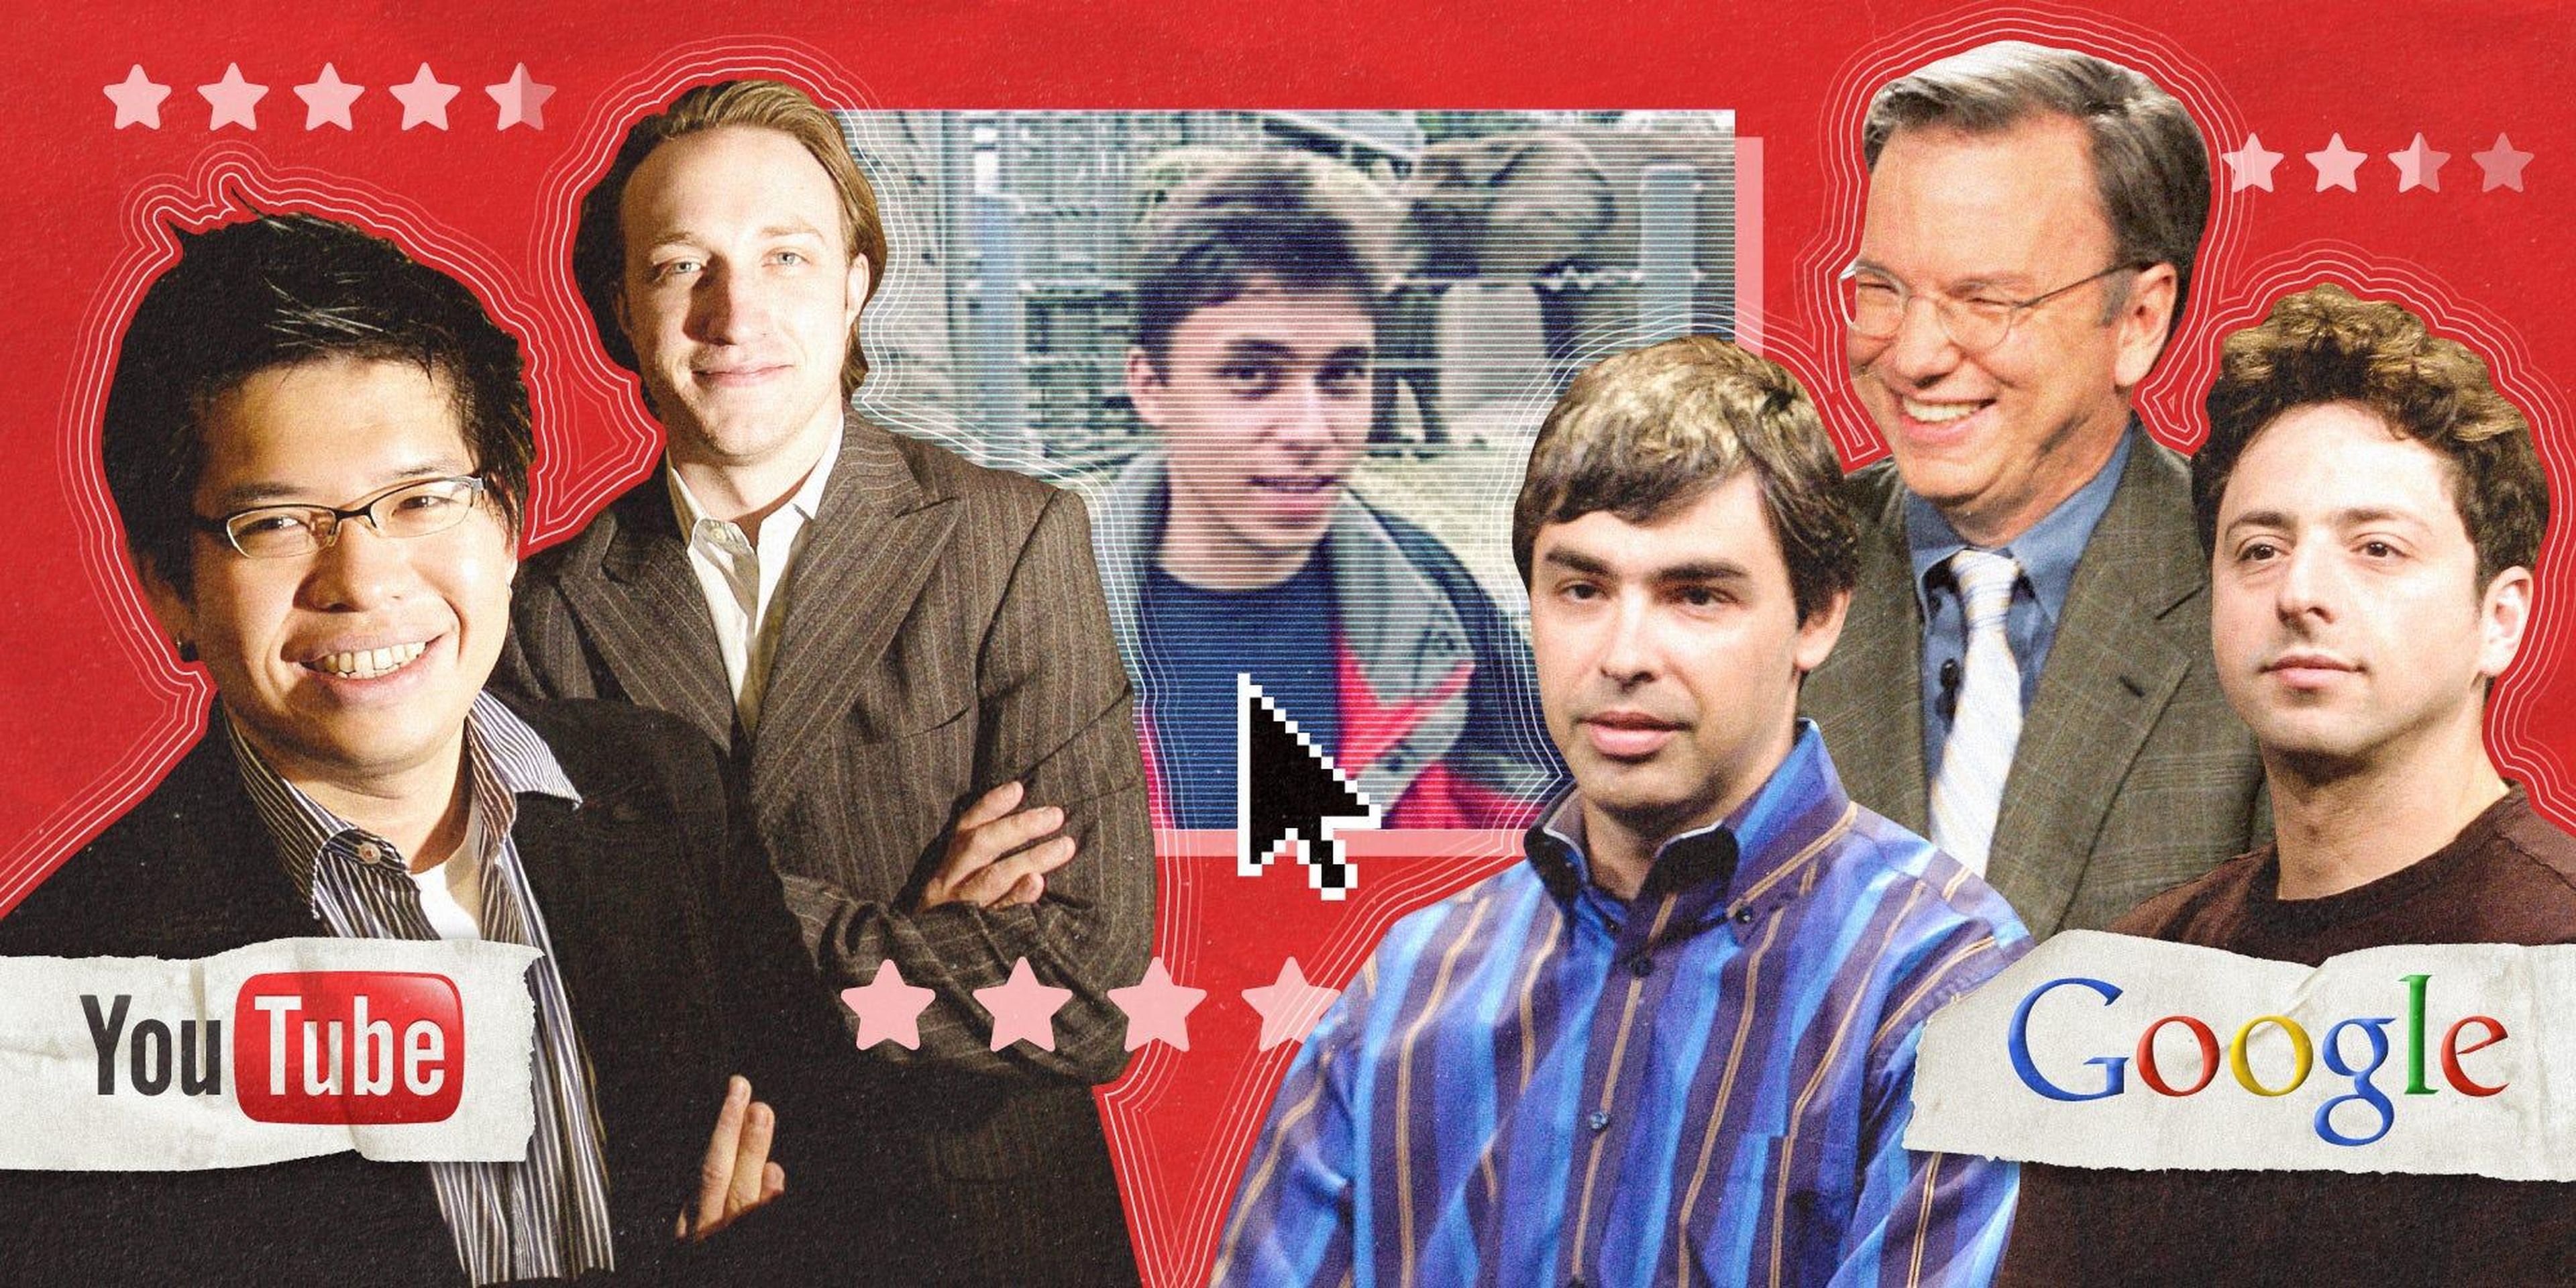 From left: YouTube founders Steve Chen, Chad Hurley, and Jawed Karim; Google cofounder Larry Page, former Google CEO Eric Schmidt, and Google cofounder Sergey Brin.